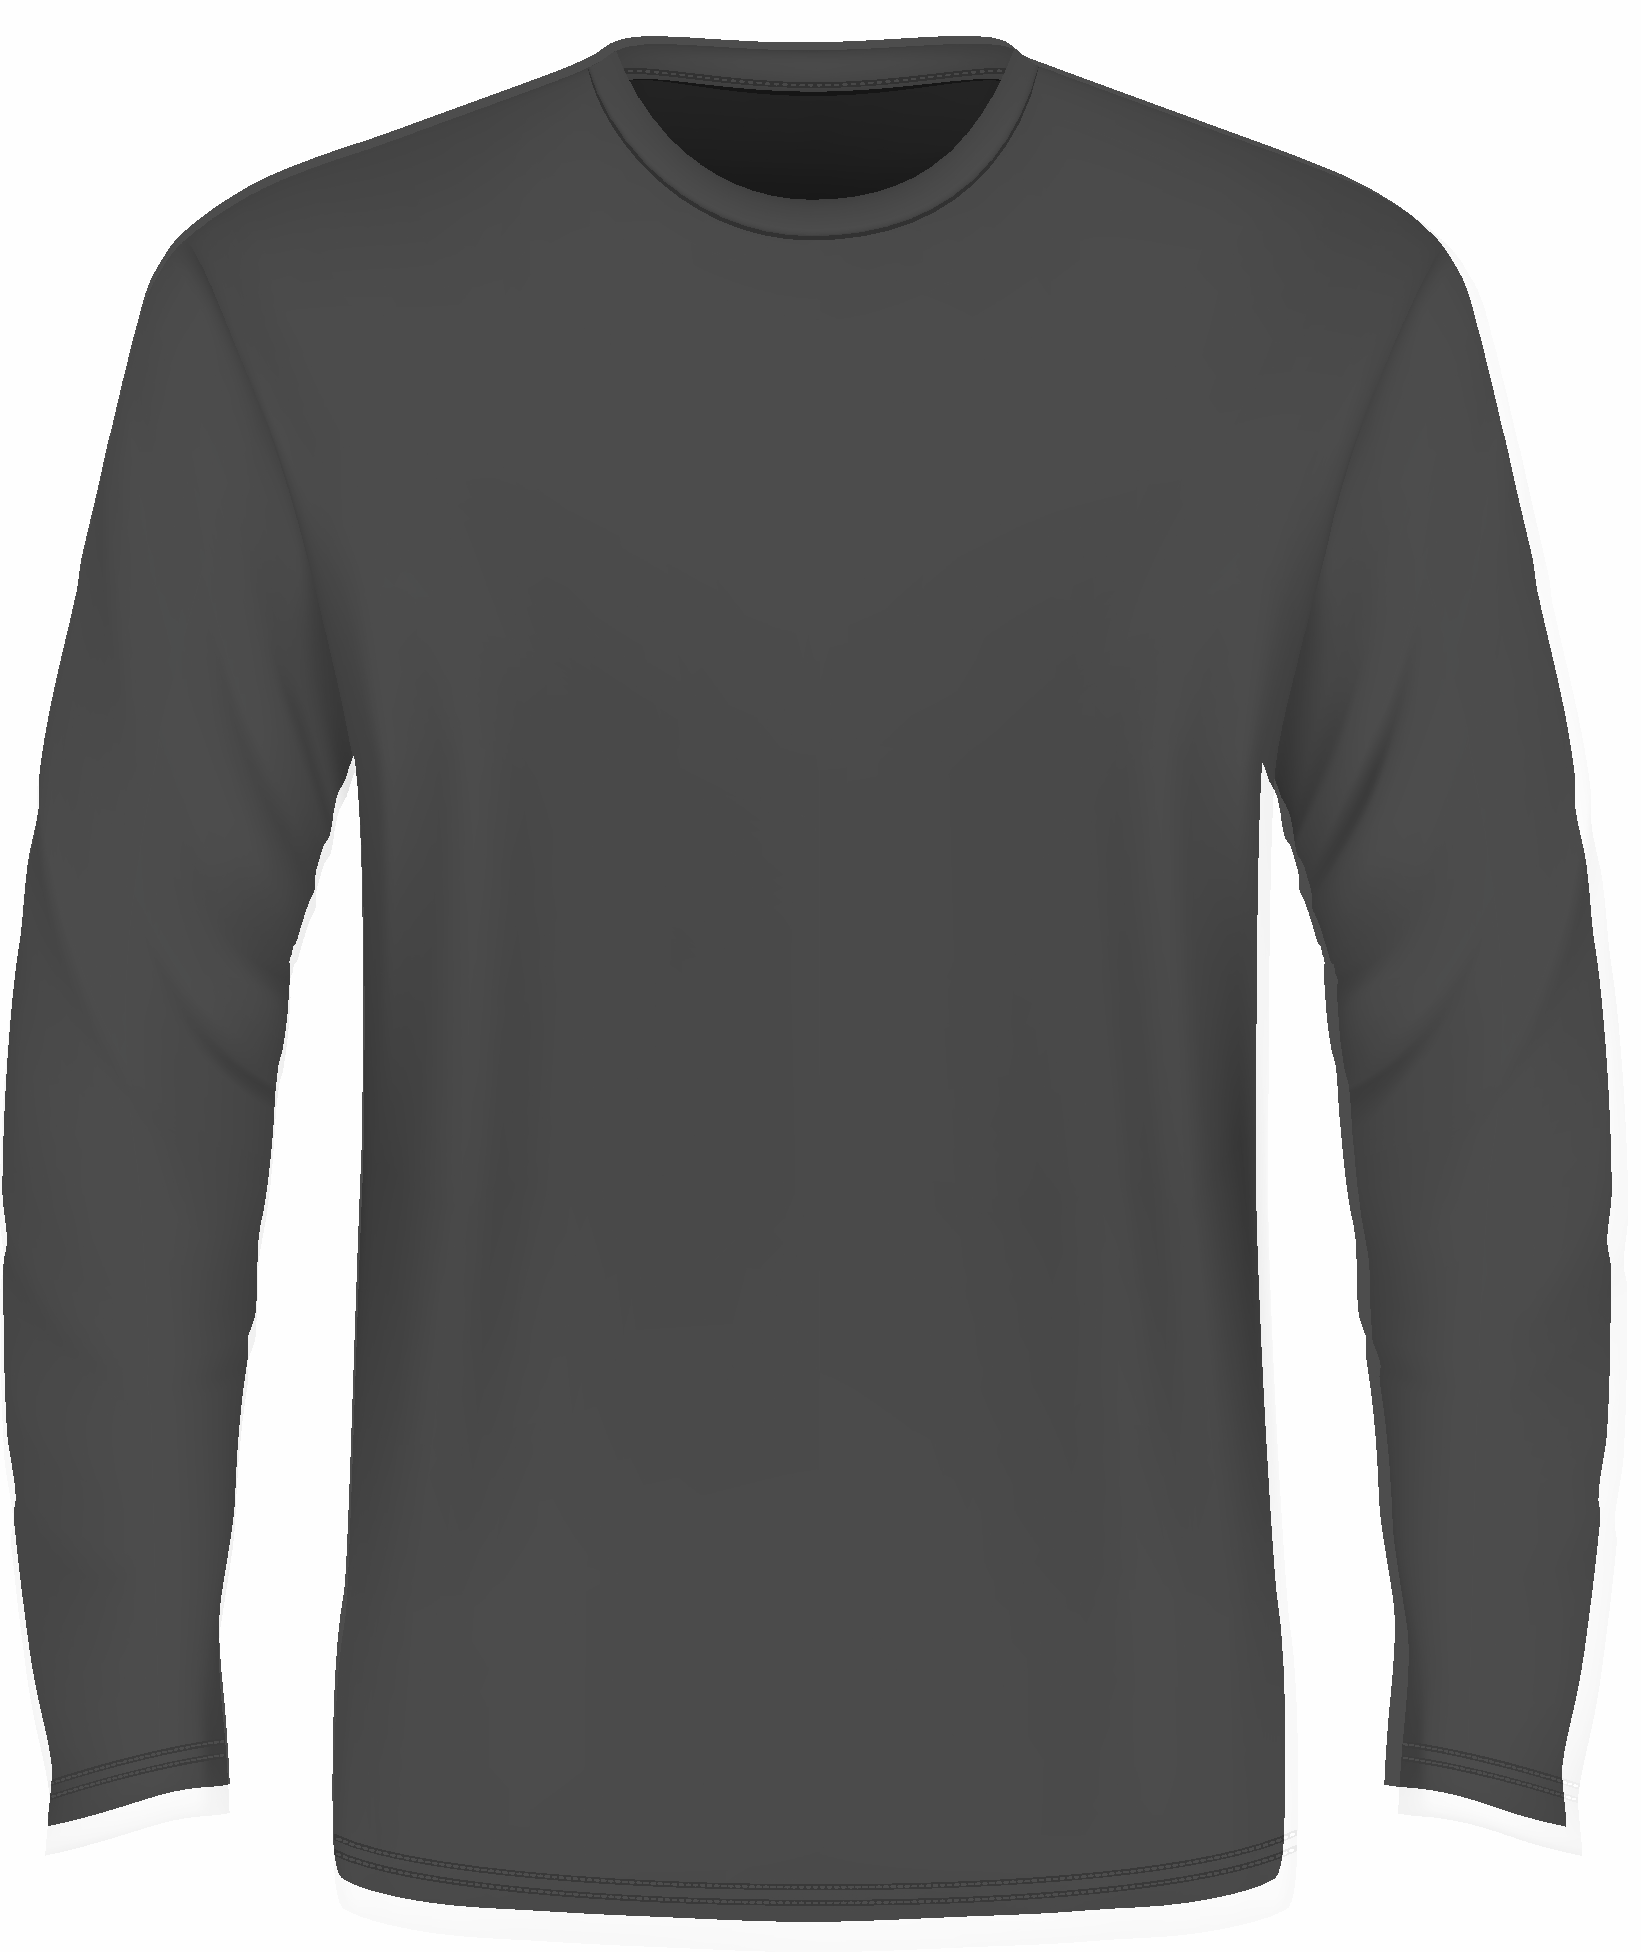 Long Sleeve Crew Neck T-Shirt PNG File